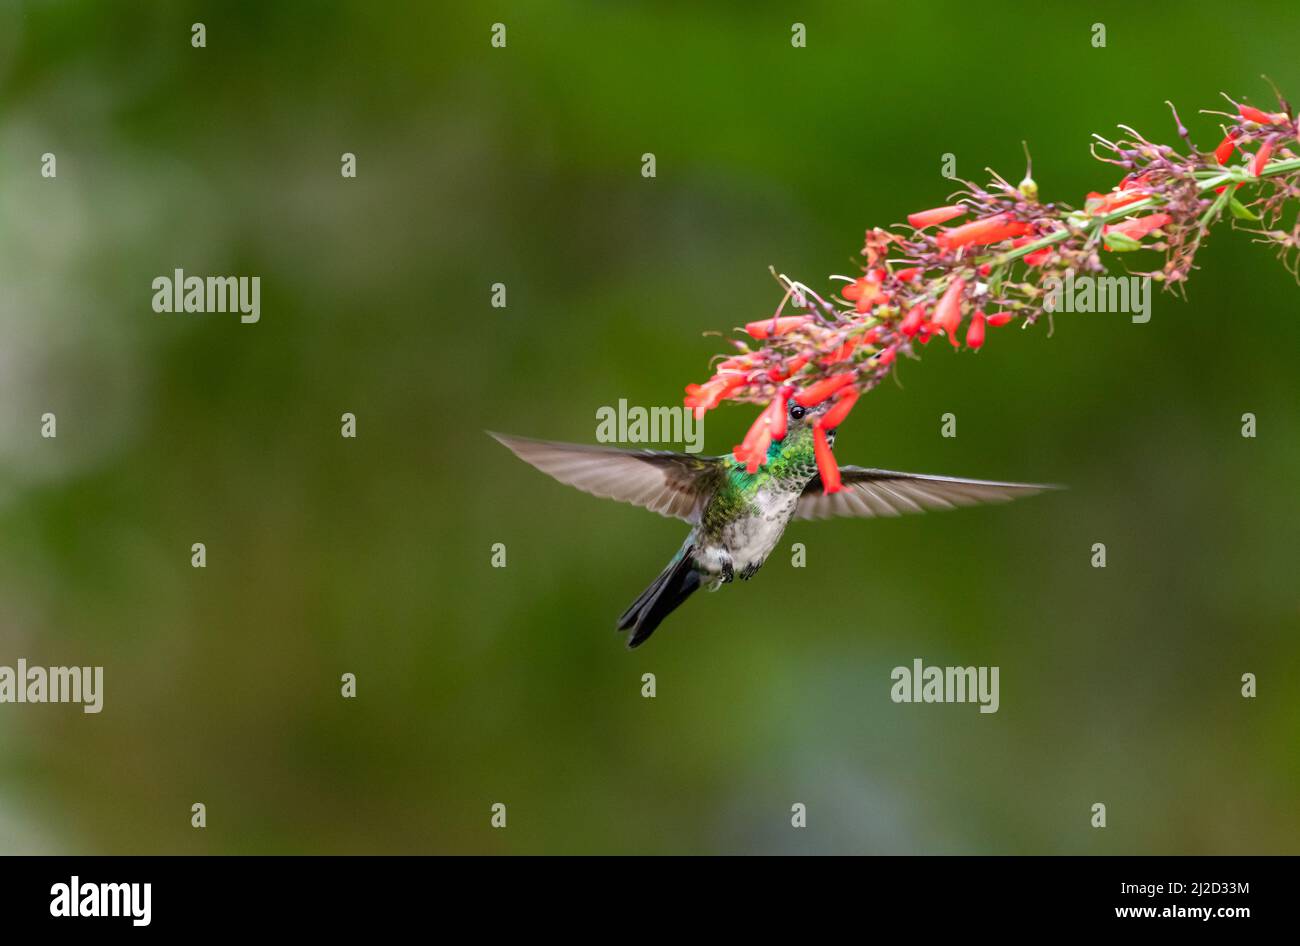 Minimalistic photo of a Blue-chinned Sapphire hummingbird, Chlorestes notata, feeding on red flowers in vivid color. Stock Photo